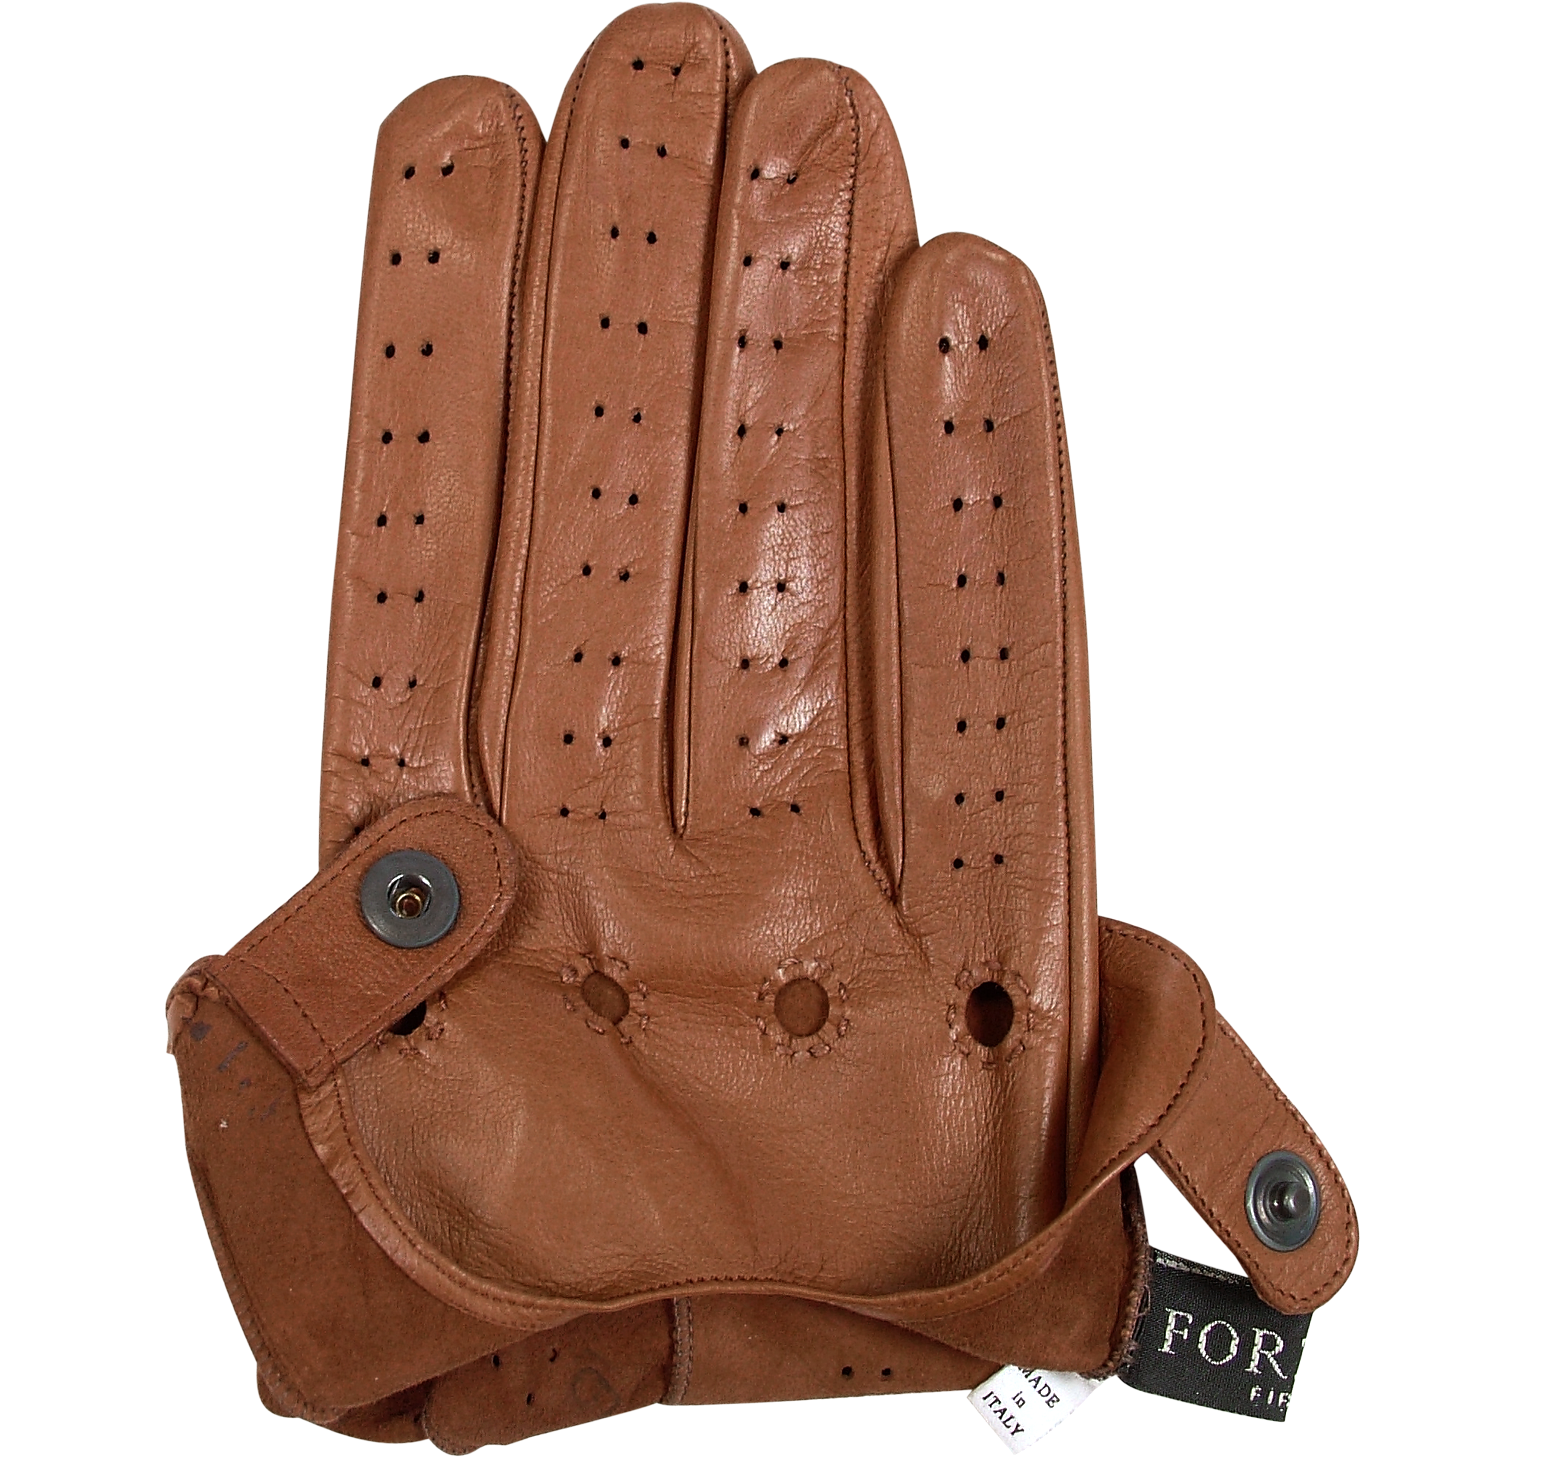 Forzieri Women's Black Perforated Italian Leather Driving Gloves S, 6 1/2